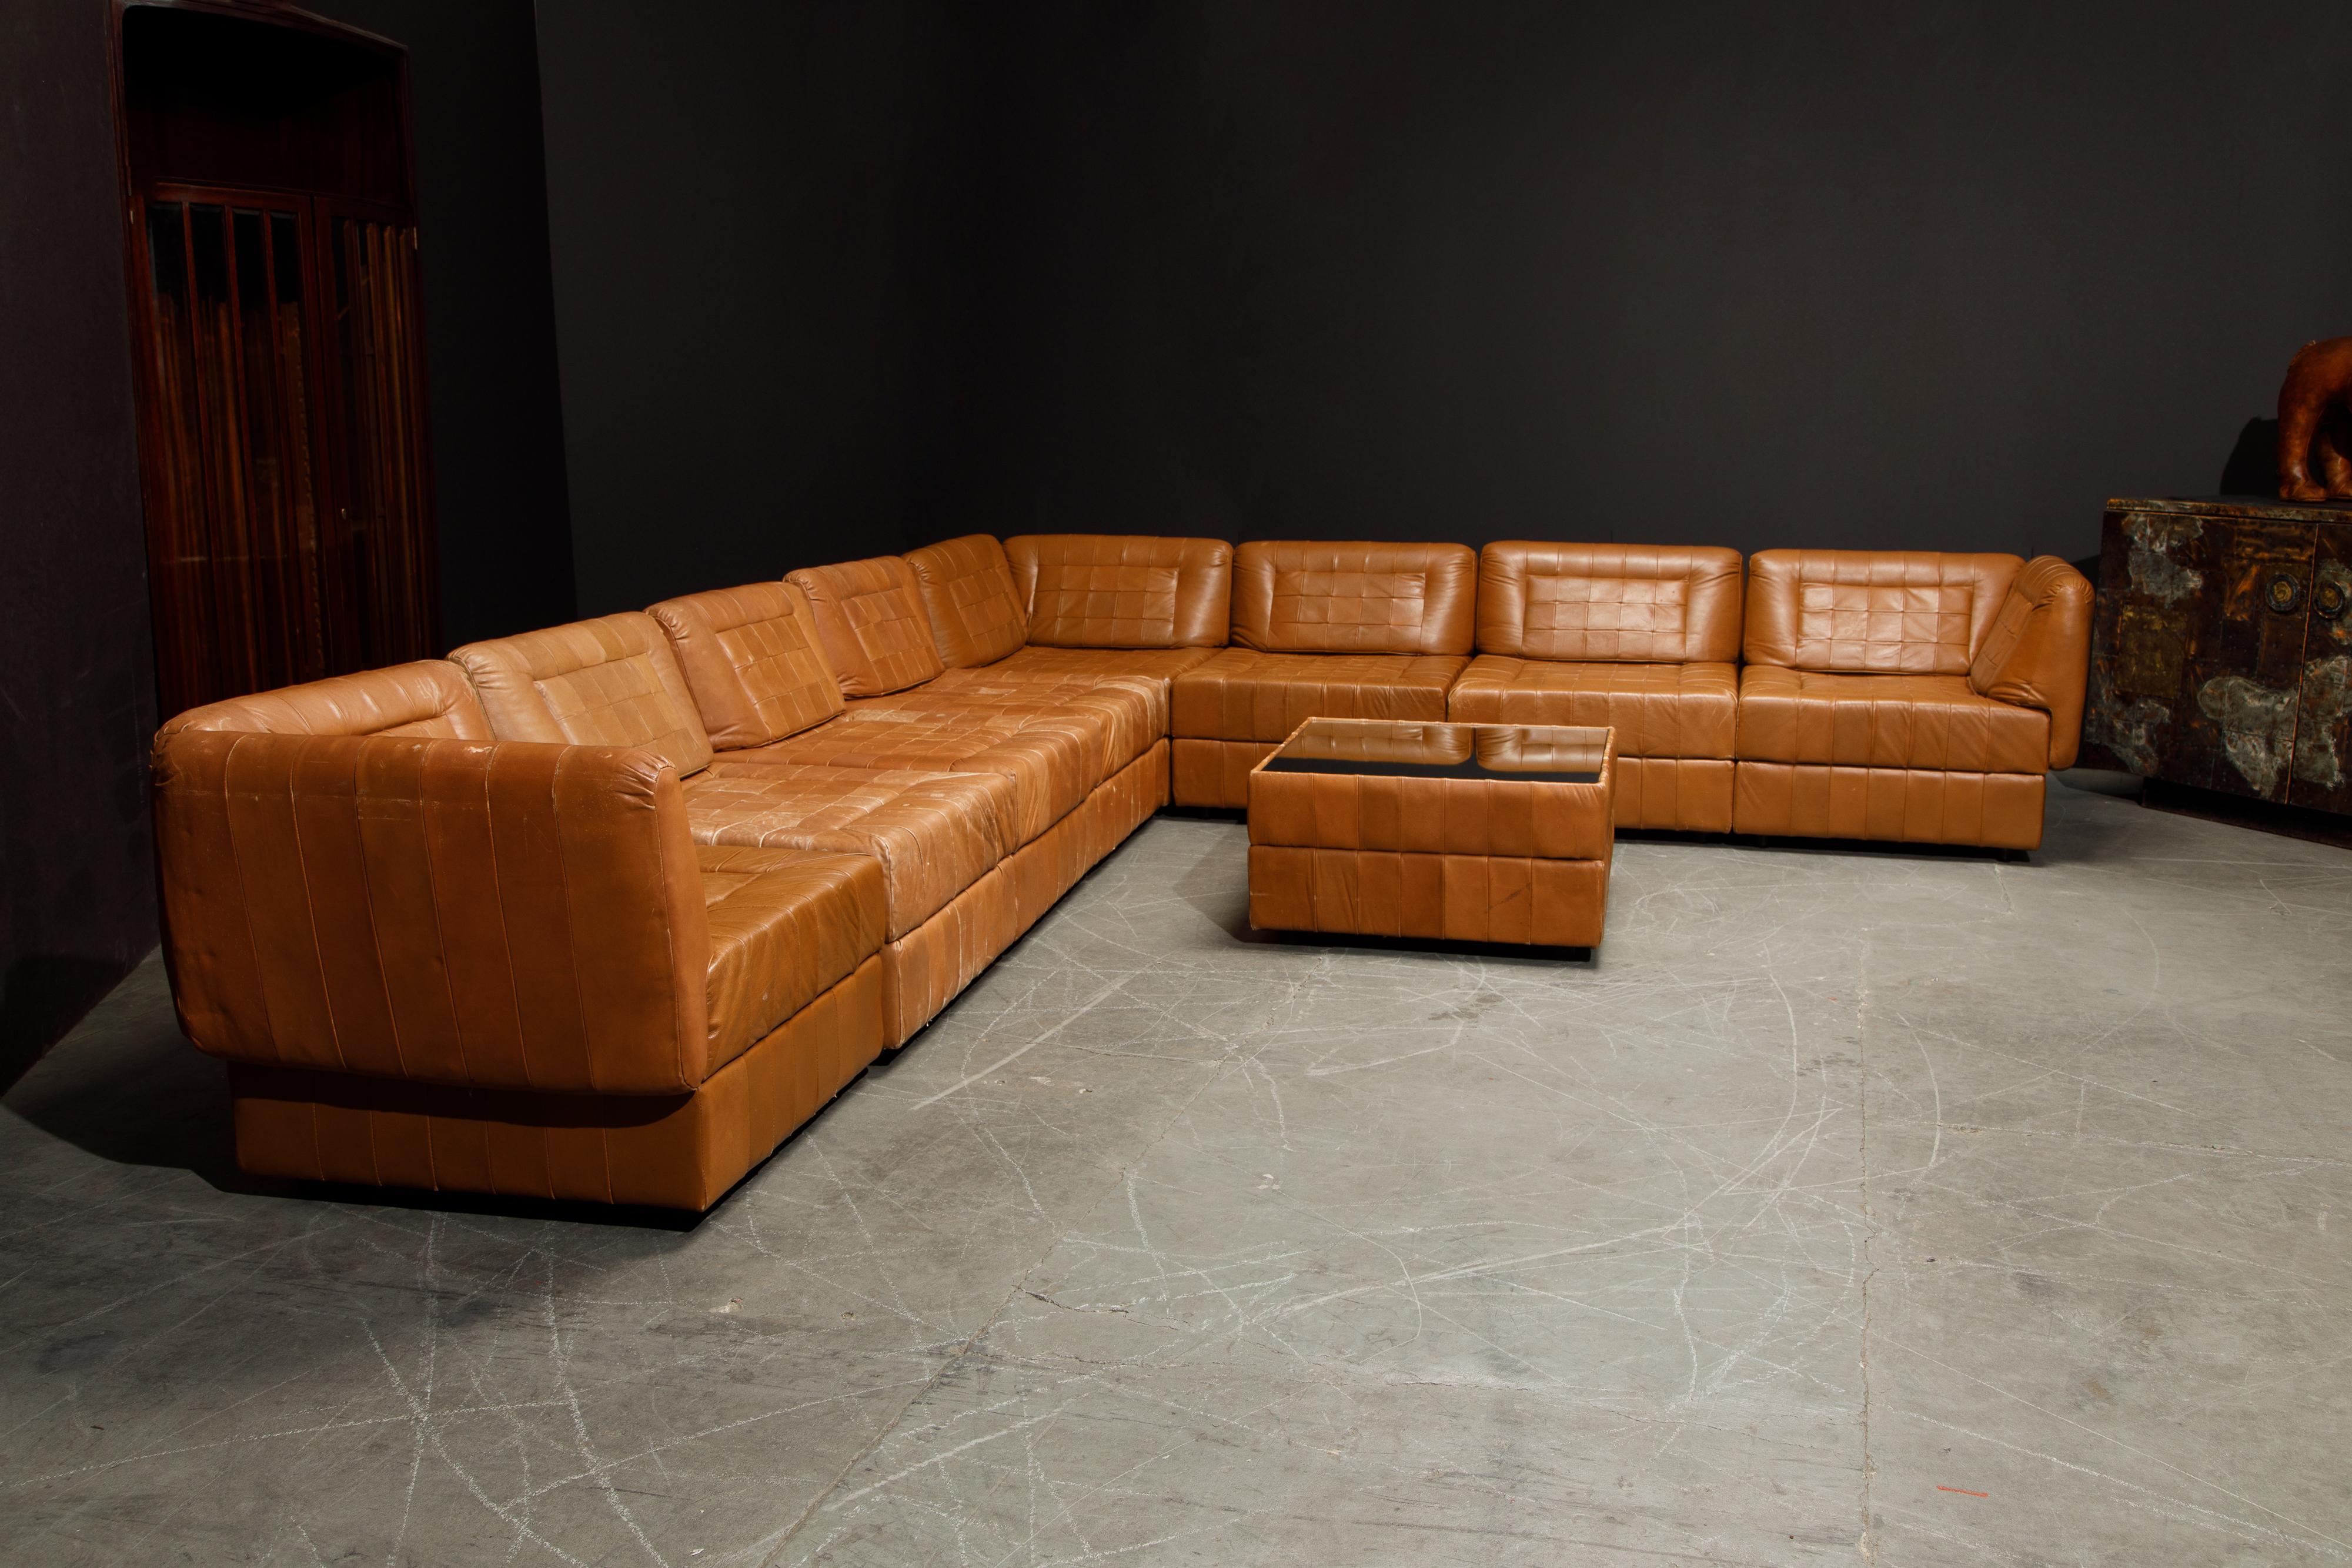 An impressive 1960s modular set of twenty-one (21) elements of cognac brown patchwork leather sectional living room set by Brazilian Modern designer Percival Lafer, signed with its original 'Lafer S.A.' / 'Made In Brazil' labels underneath each